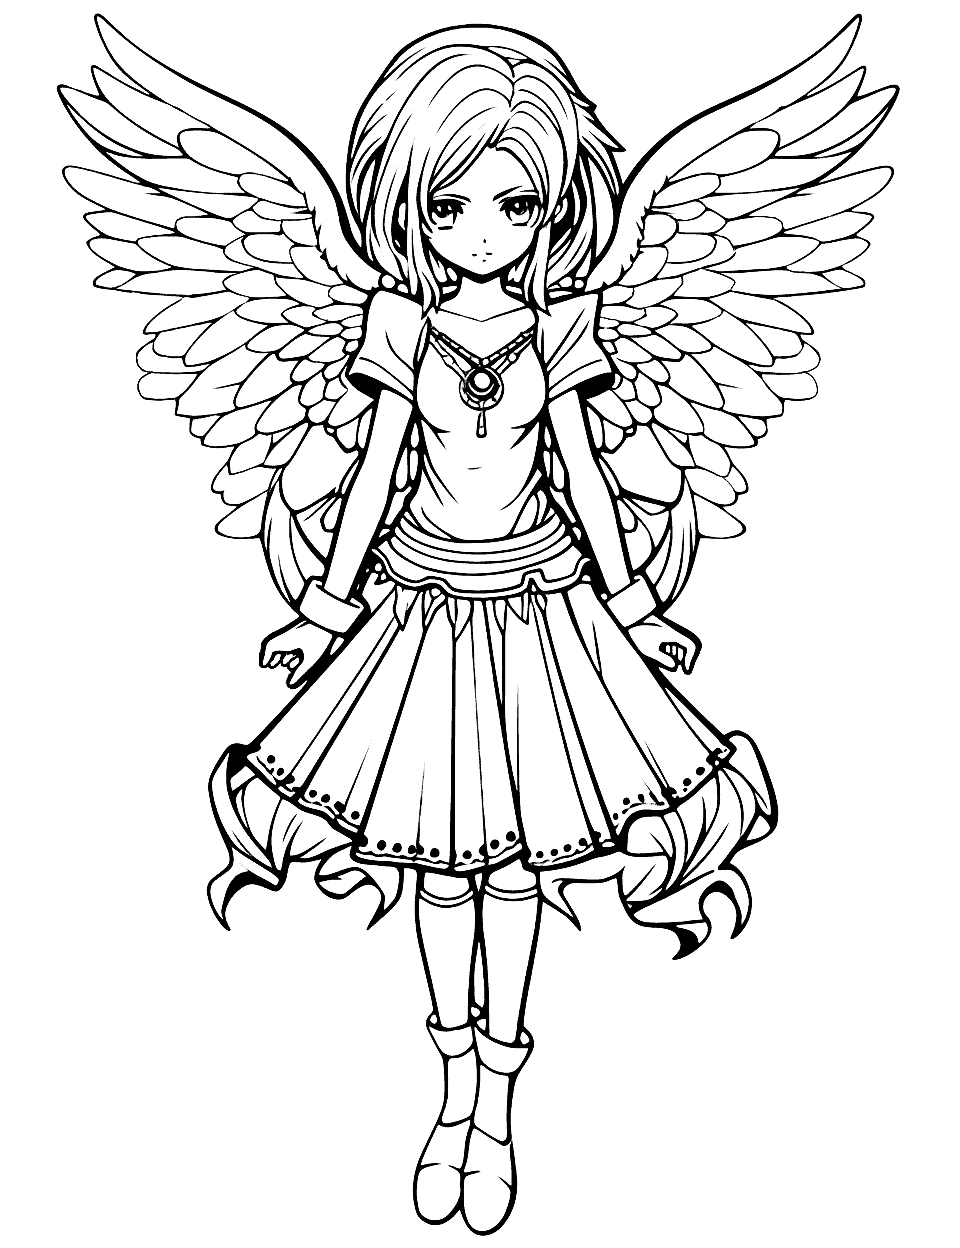 Detailed Anime Angel Coloring Page - A detailed anime angel with complex patterns on her wings and dress.